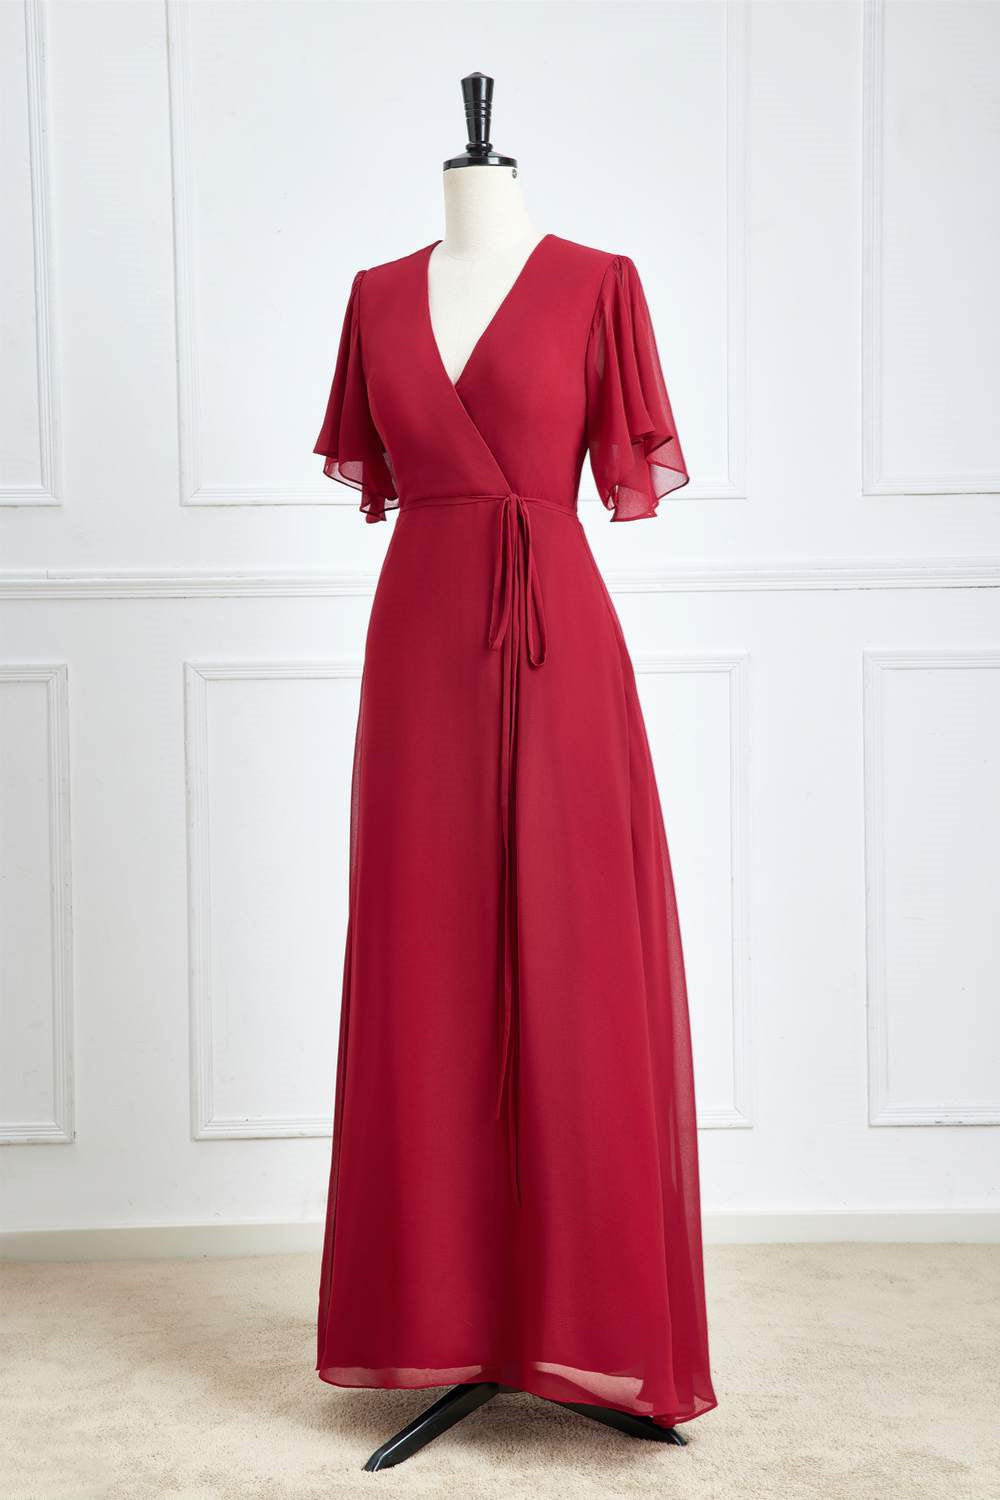 Wine Red Surplice Flaunt Sleeves A-line Long Bridesmaid Dress